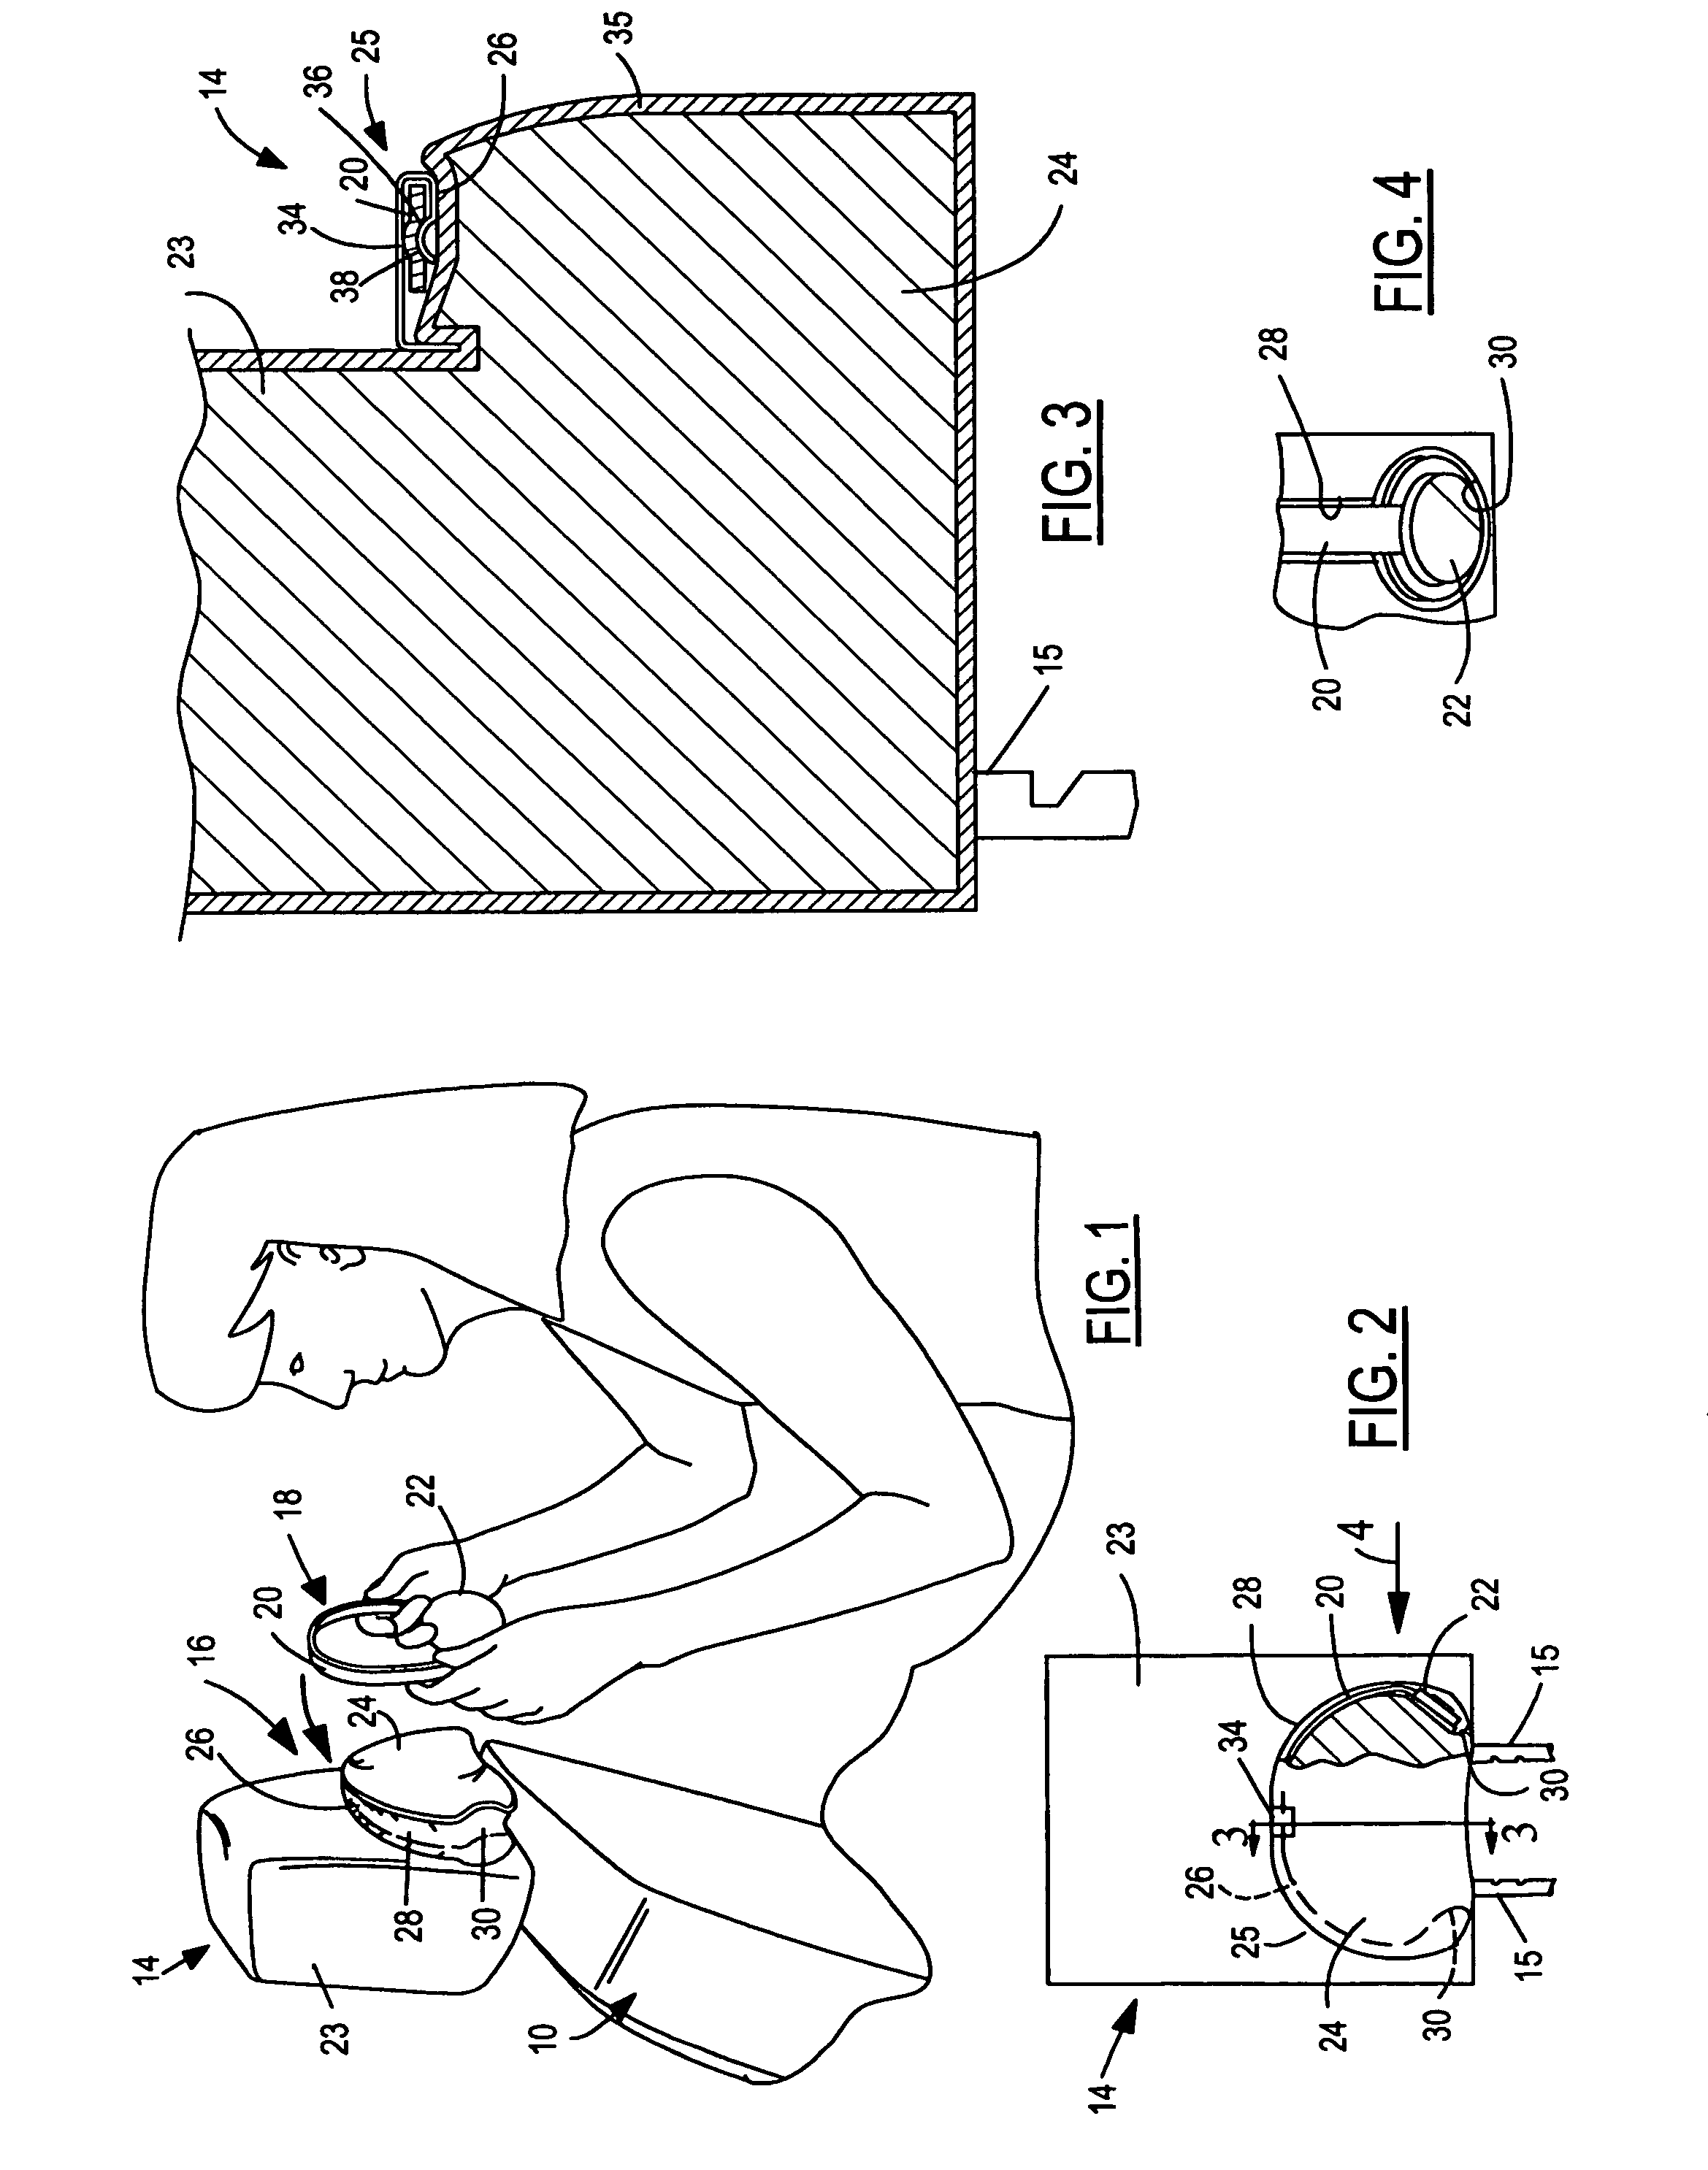 Vehicular packaging system for headphone devices